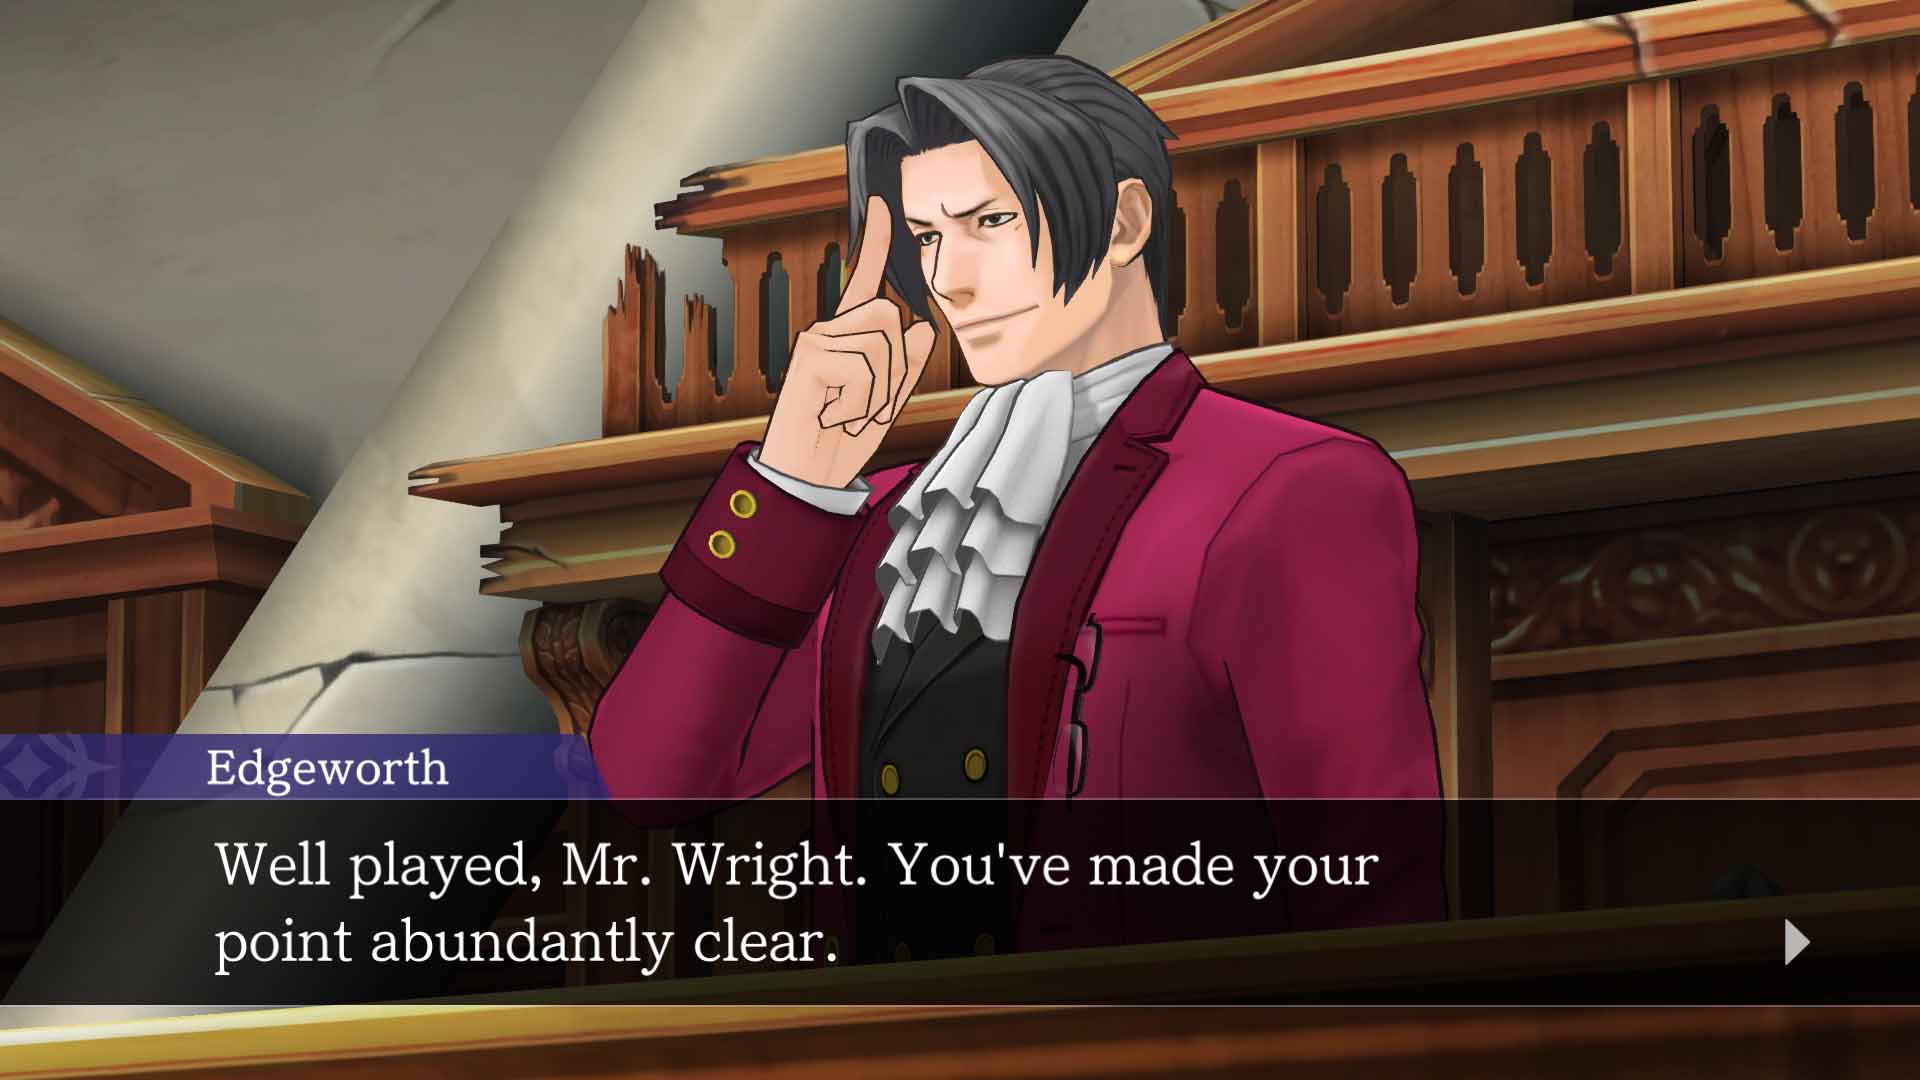 Phoenix Wright Ace Attorney Trilogy - Playstation 4 PS4